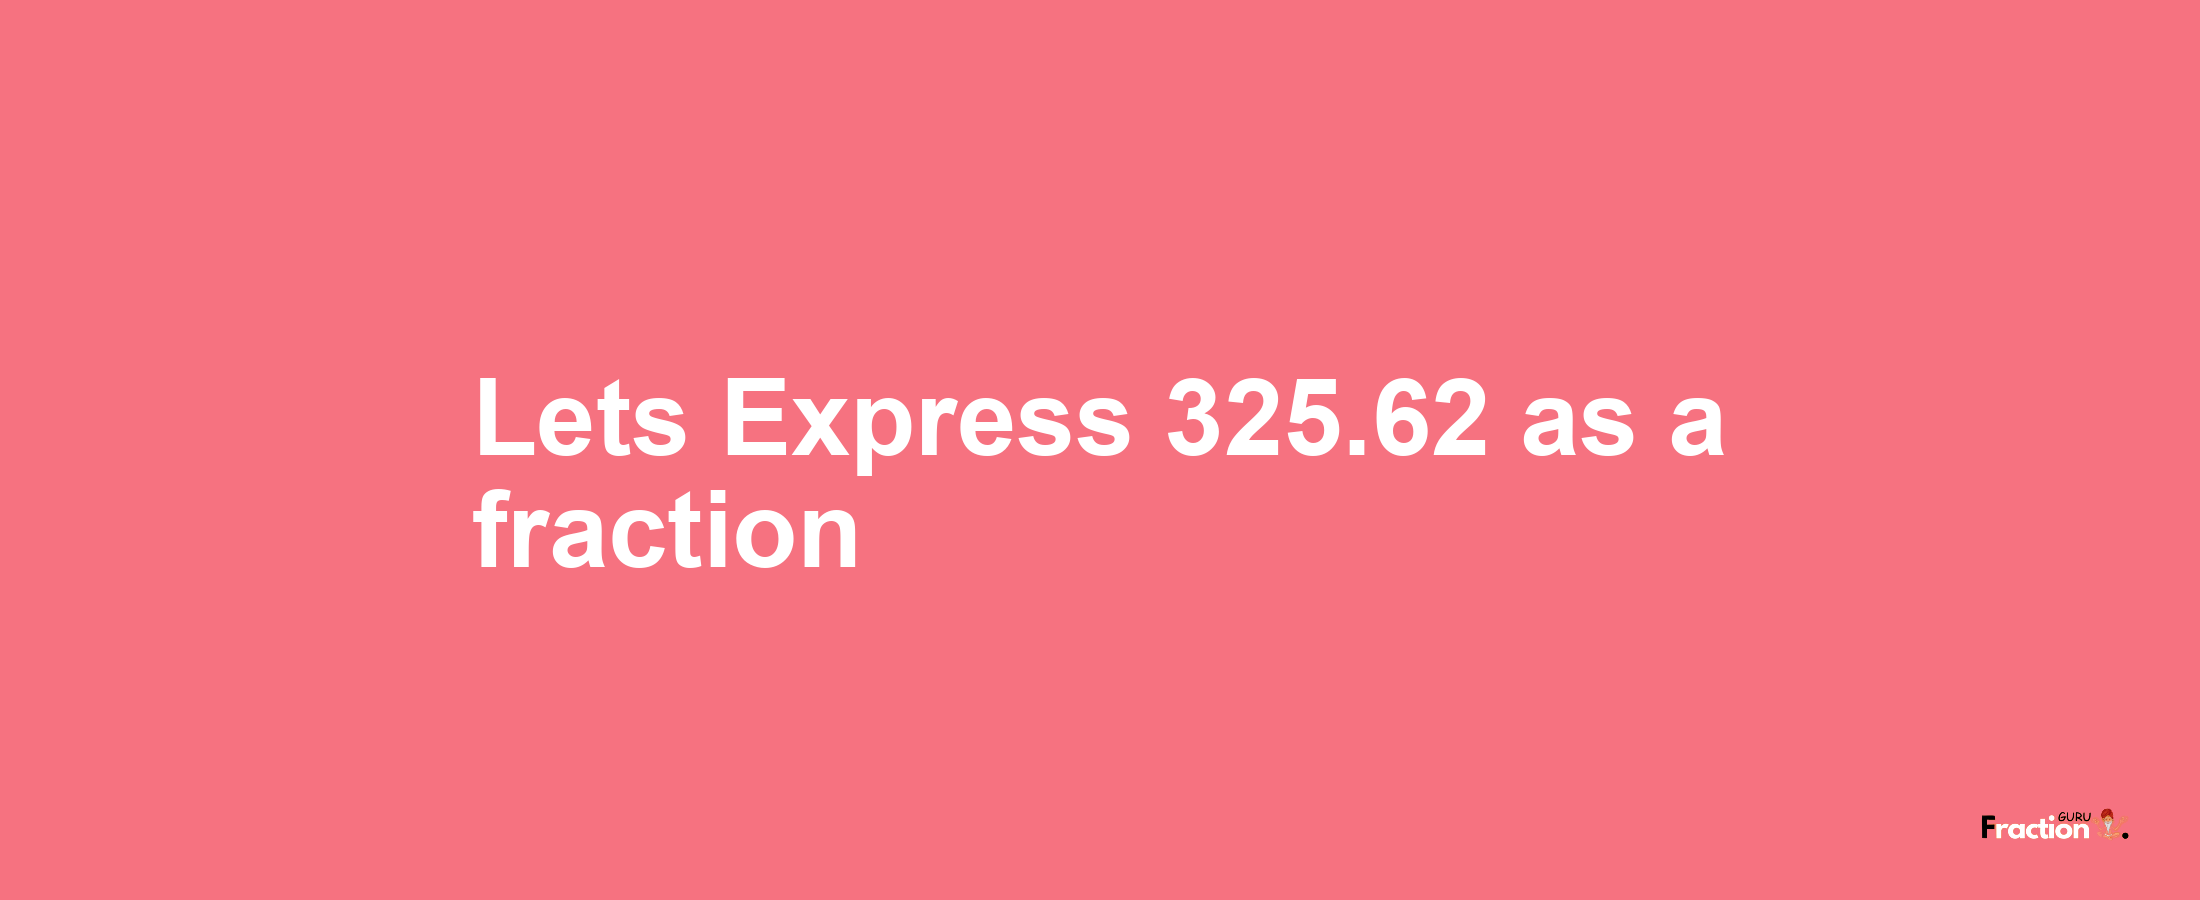 Lets Express 325.62 as afraction